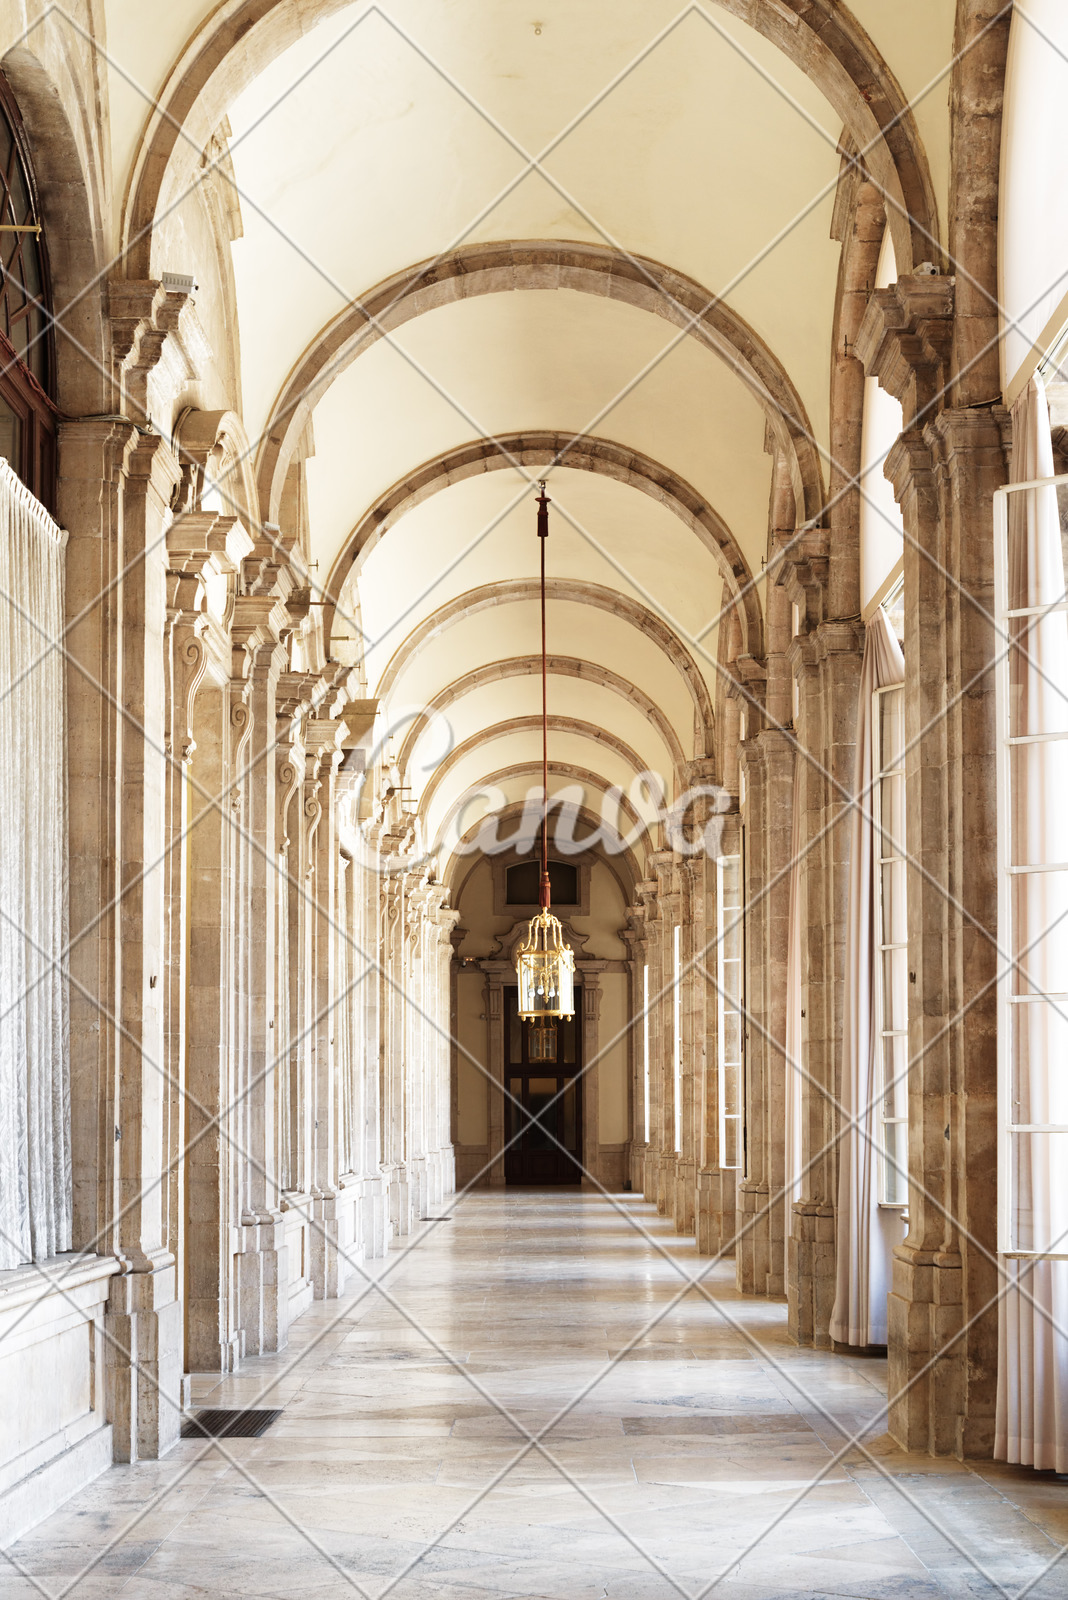 Passage With Arches In The Royal Palace Of Madrid Photos